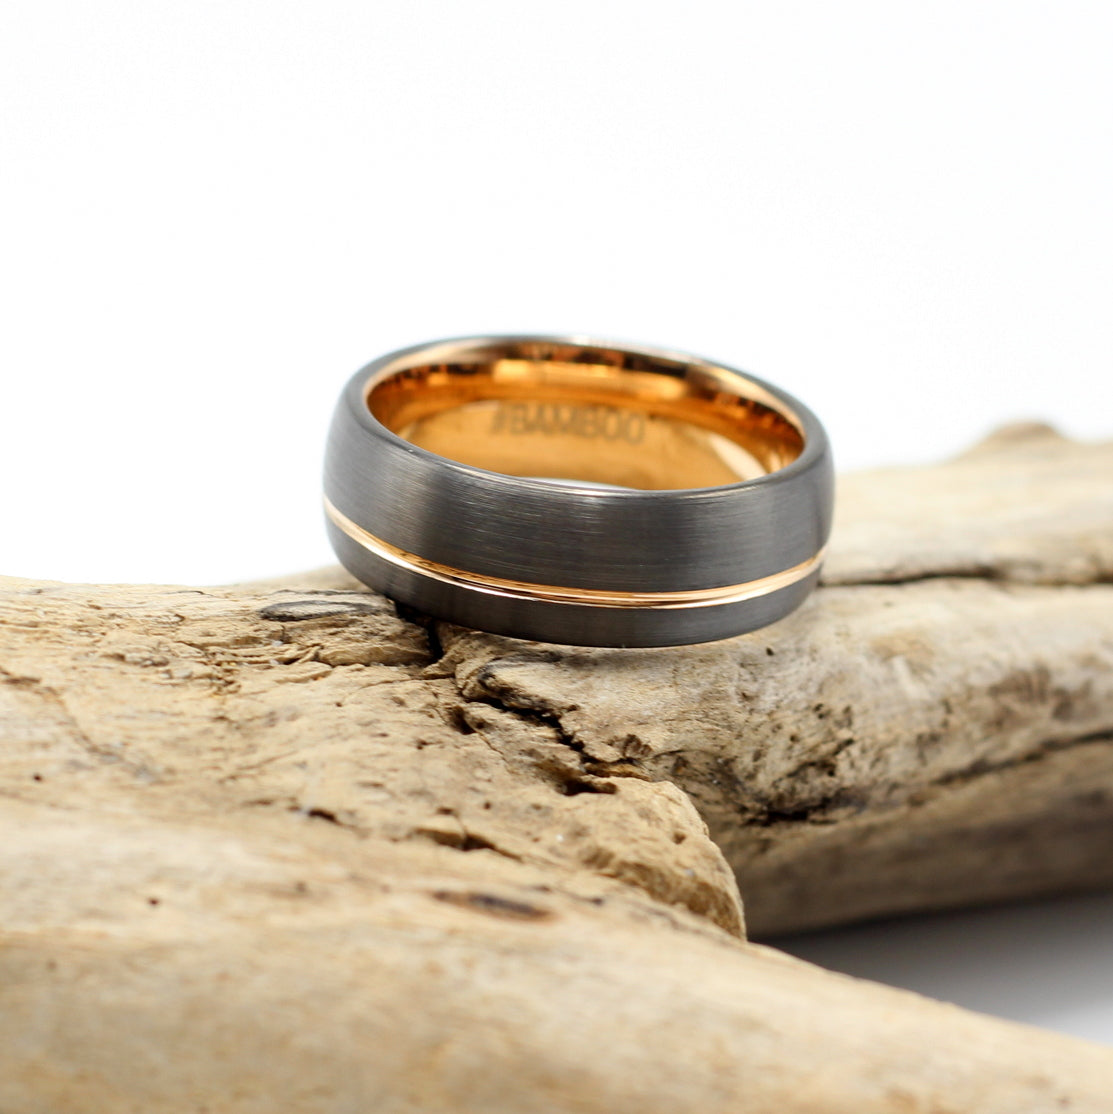 Manly metal gunmetal grey tungsten ring with rose gold inlay, men's 8mm wedding band, personalise your ring for R80.